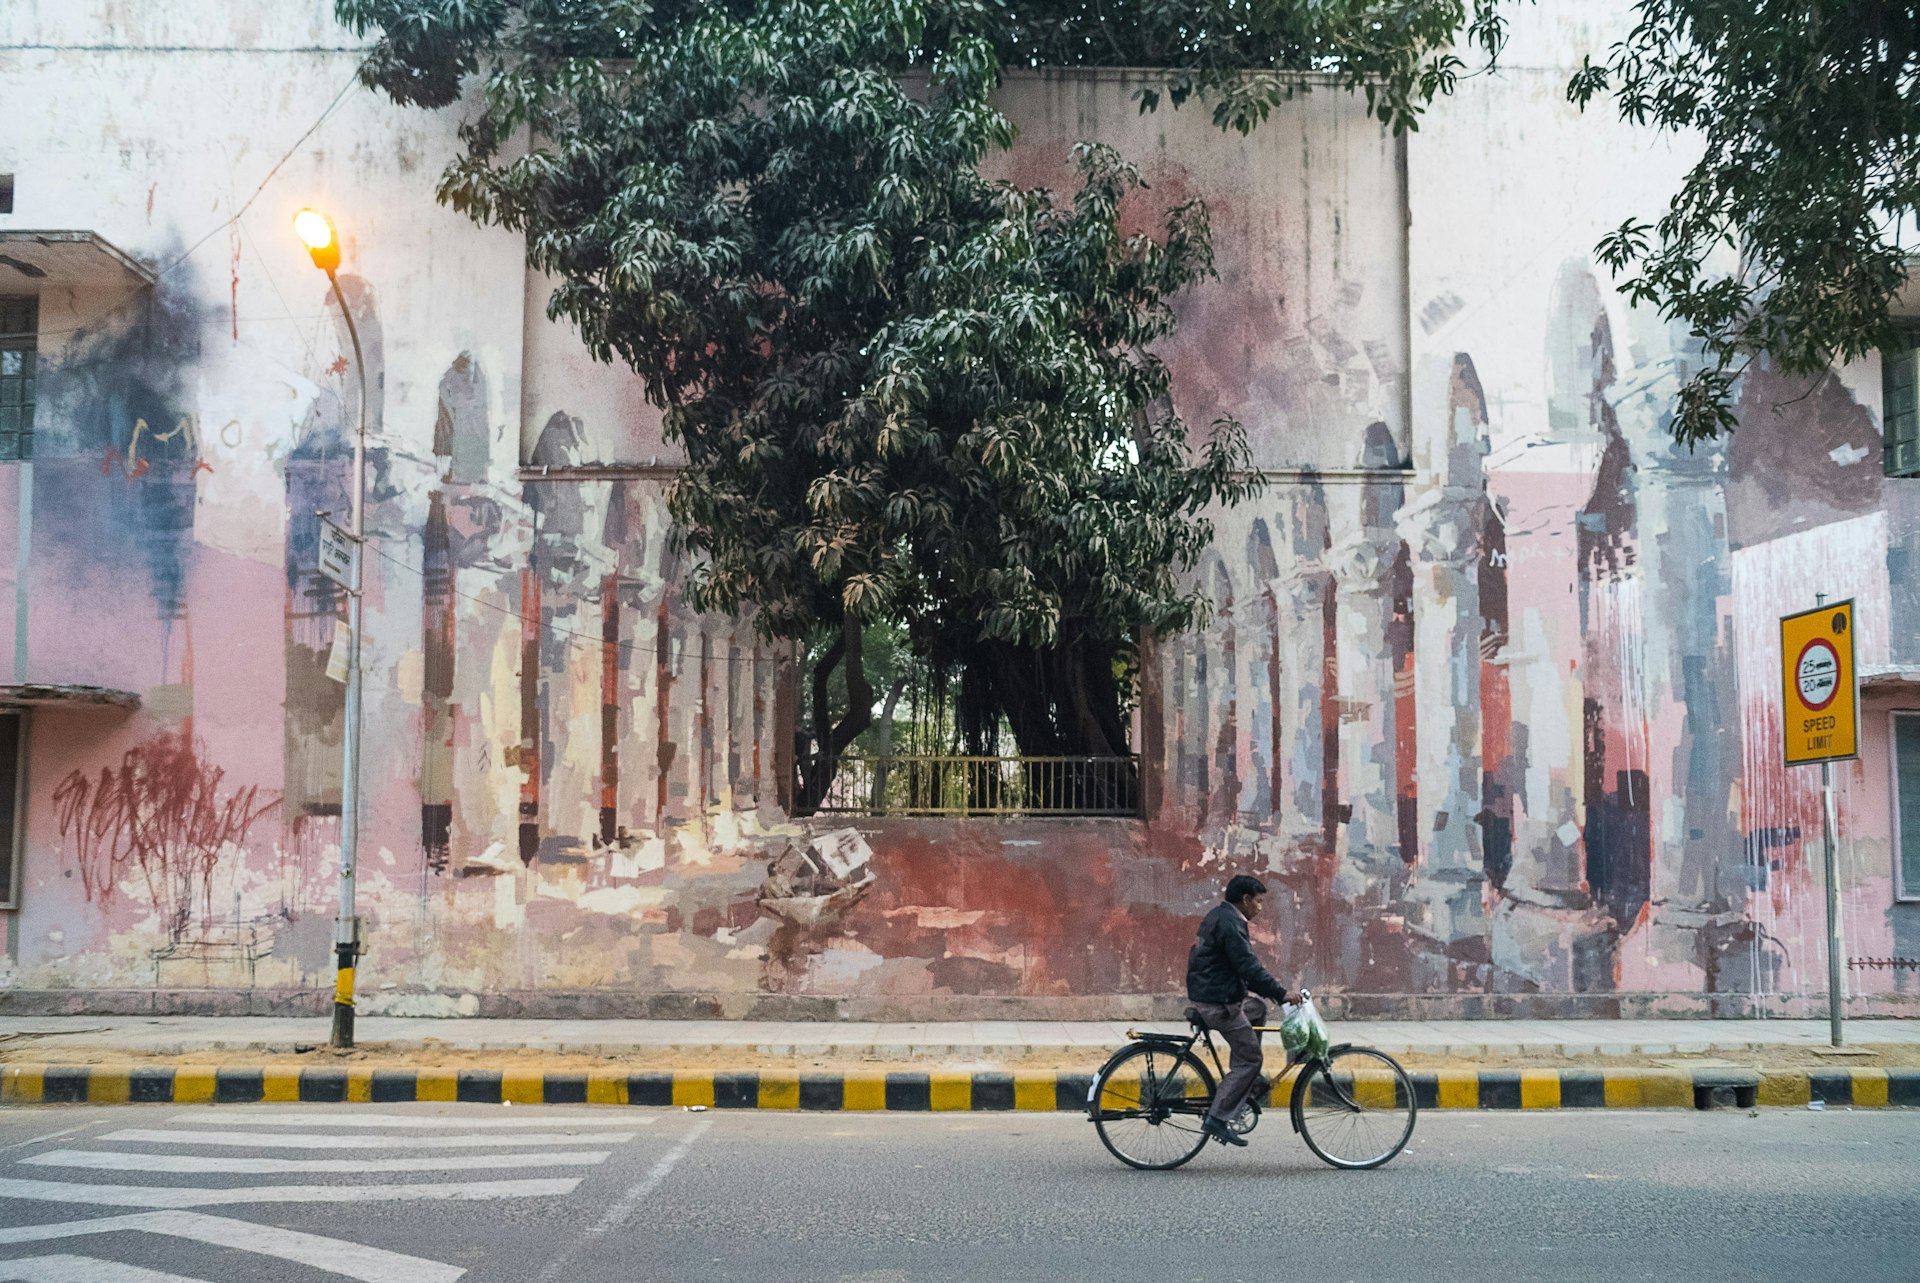 Man cycling in India with a large mural of street art behind him